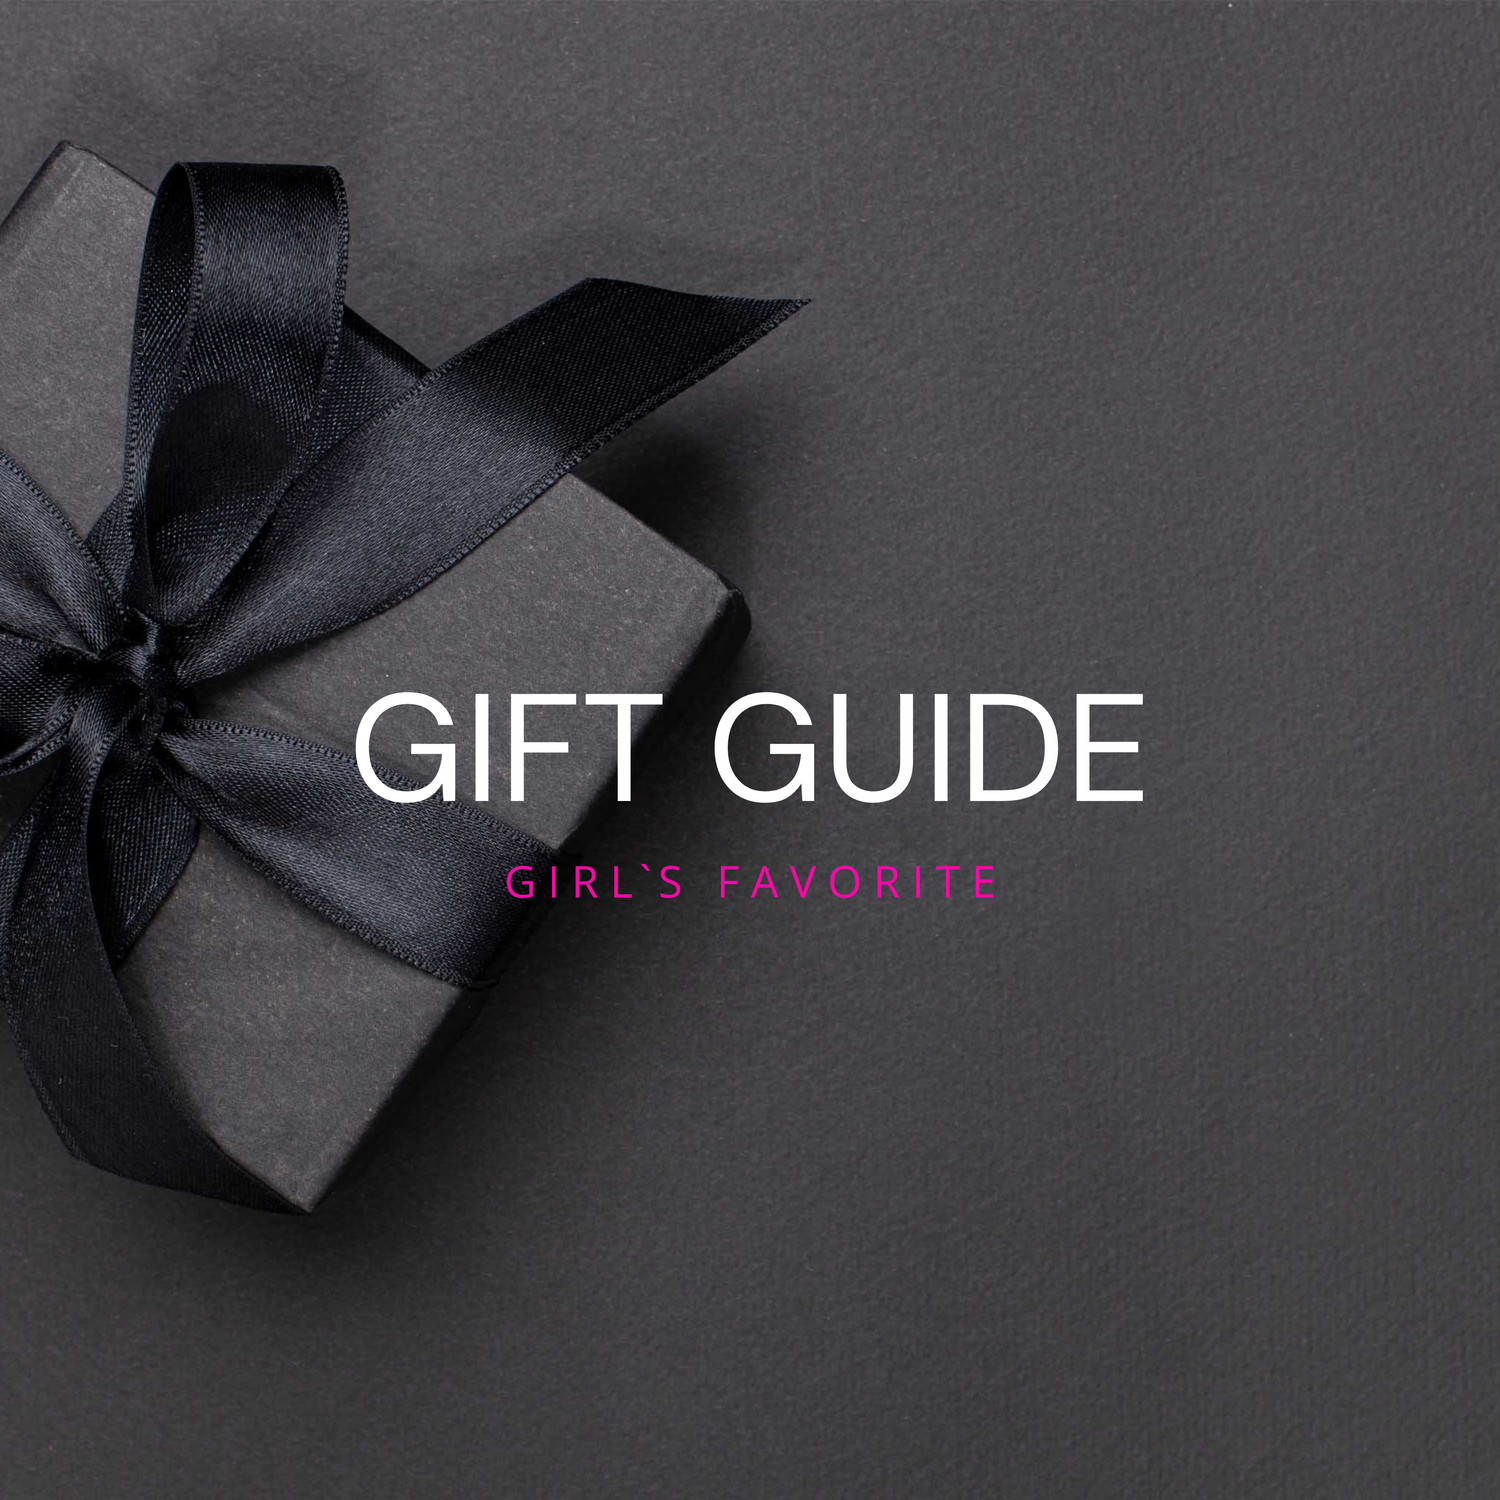 Tips for gifts